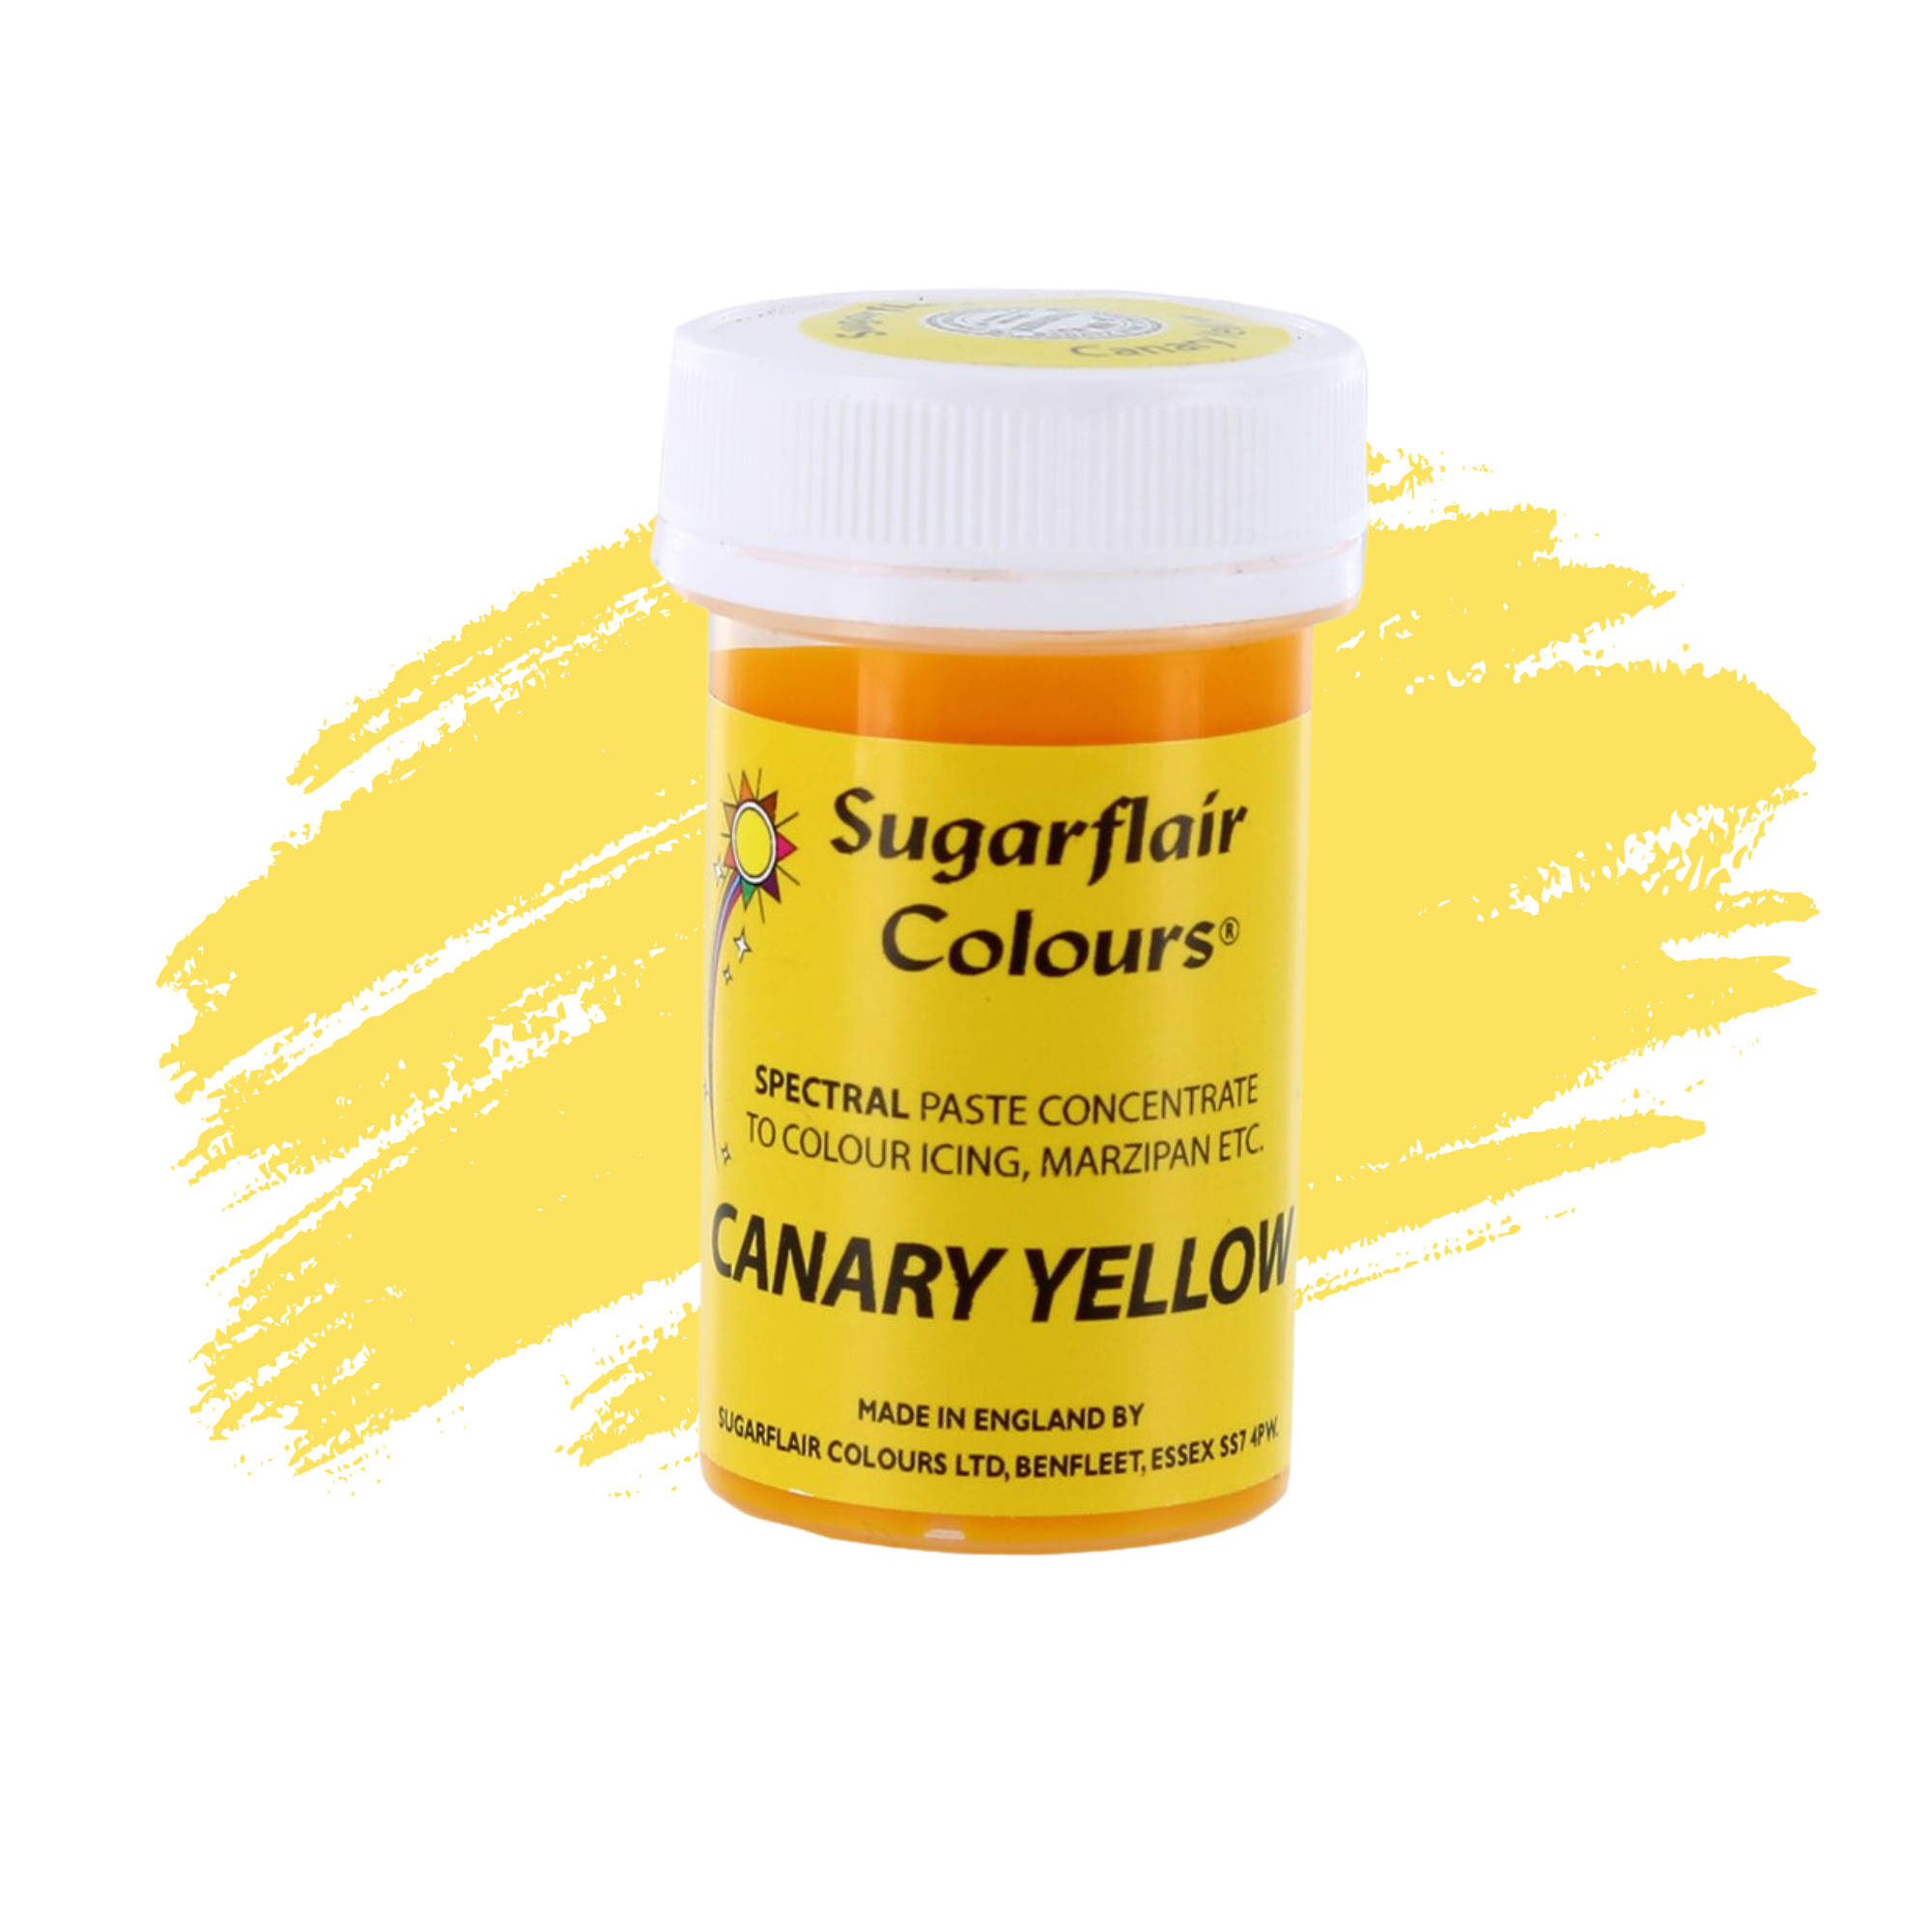 Sugarflair Paste Colours Concentrated Food Colouring - Spectral Canary Yellow - 25g